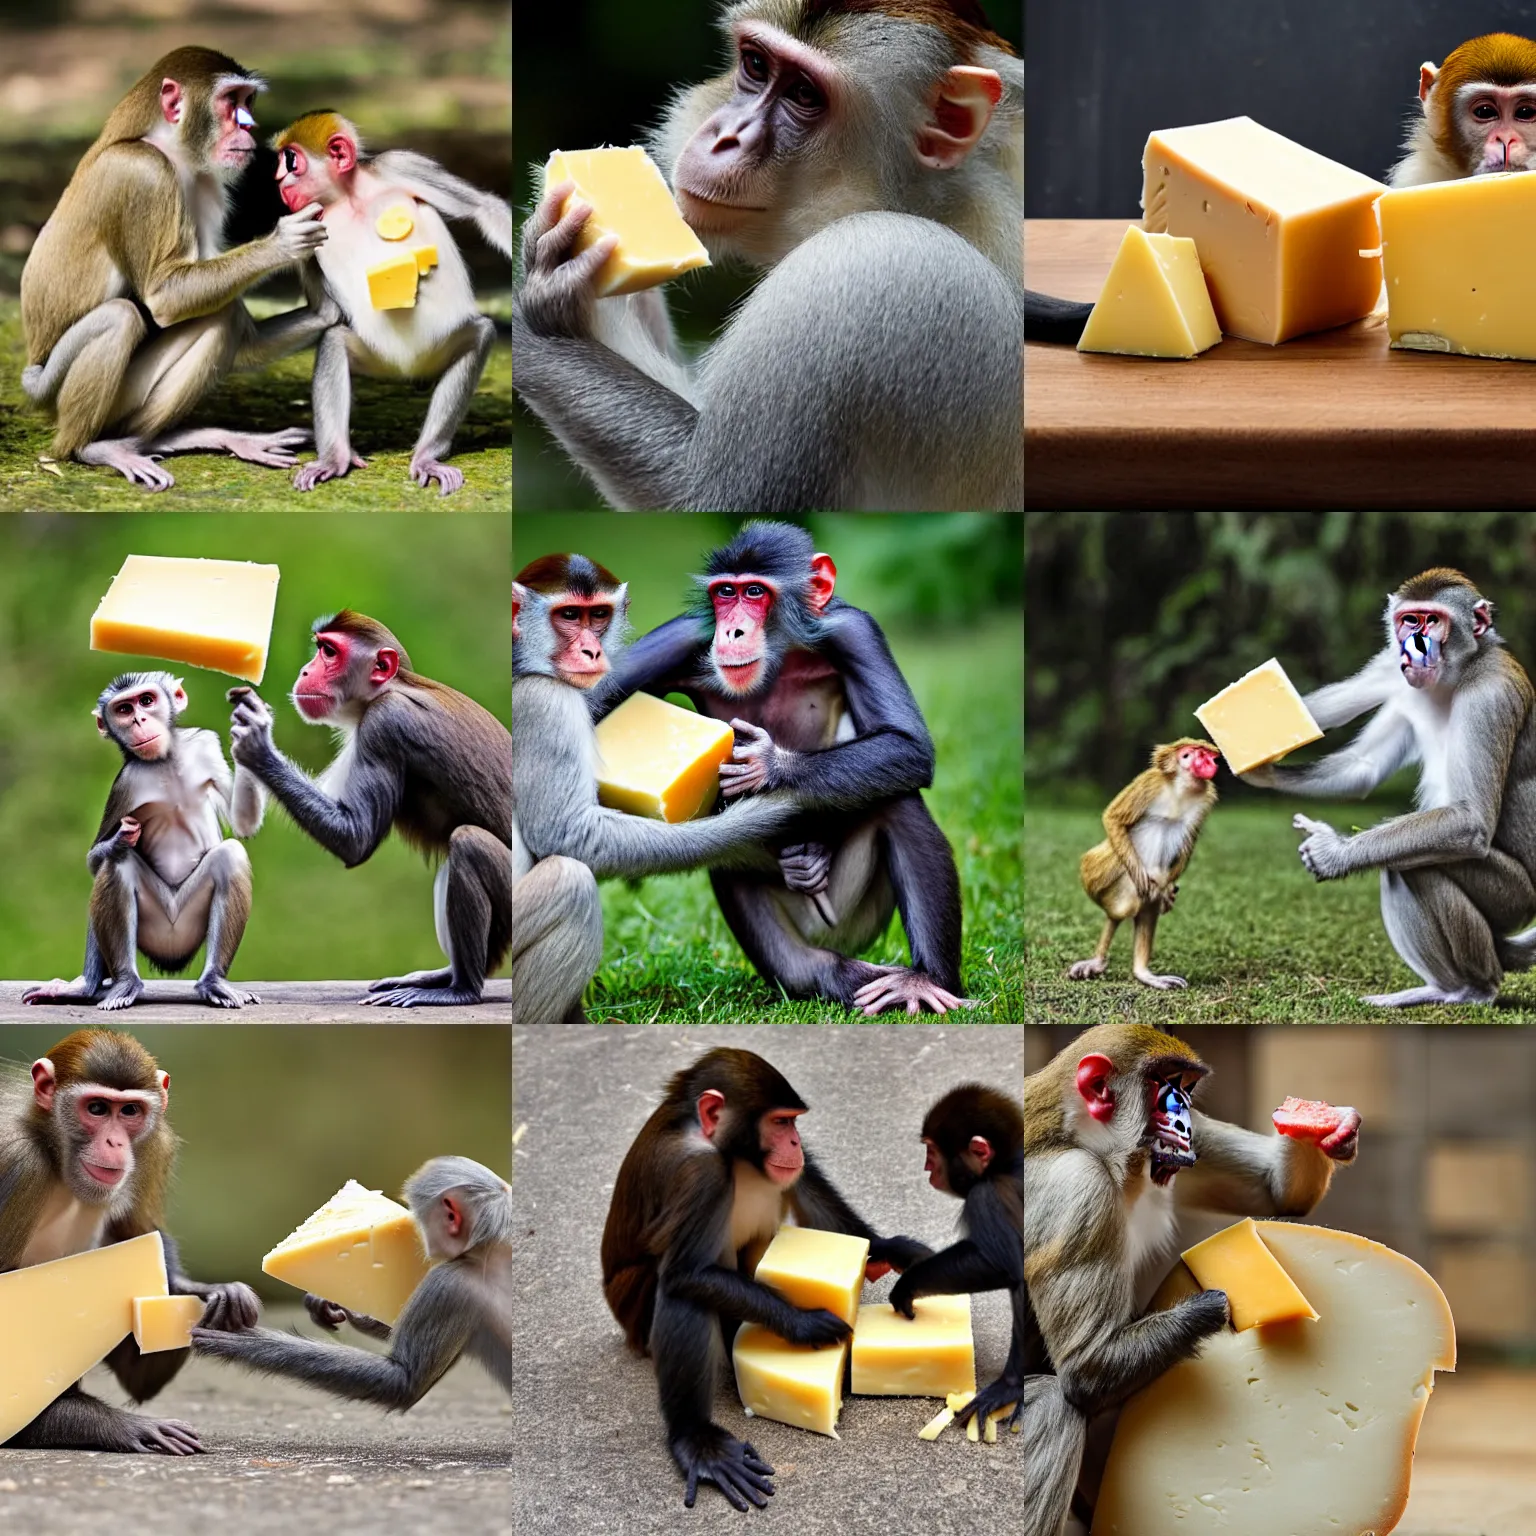 Prompt: a monkey and a chicken are fighting over a piece of cheese